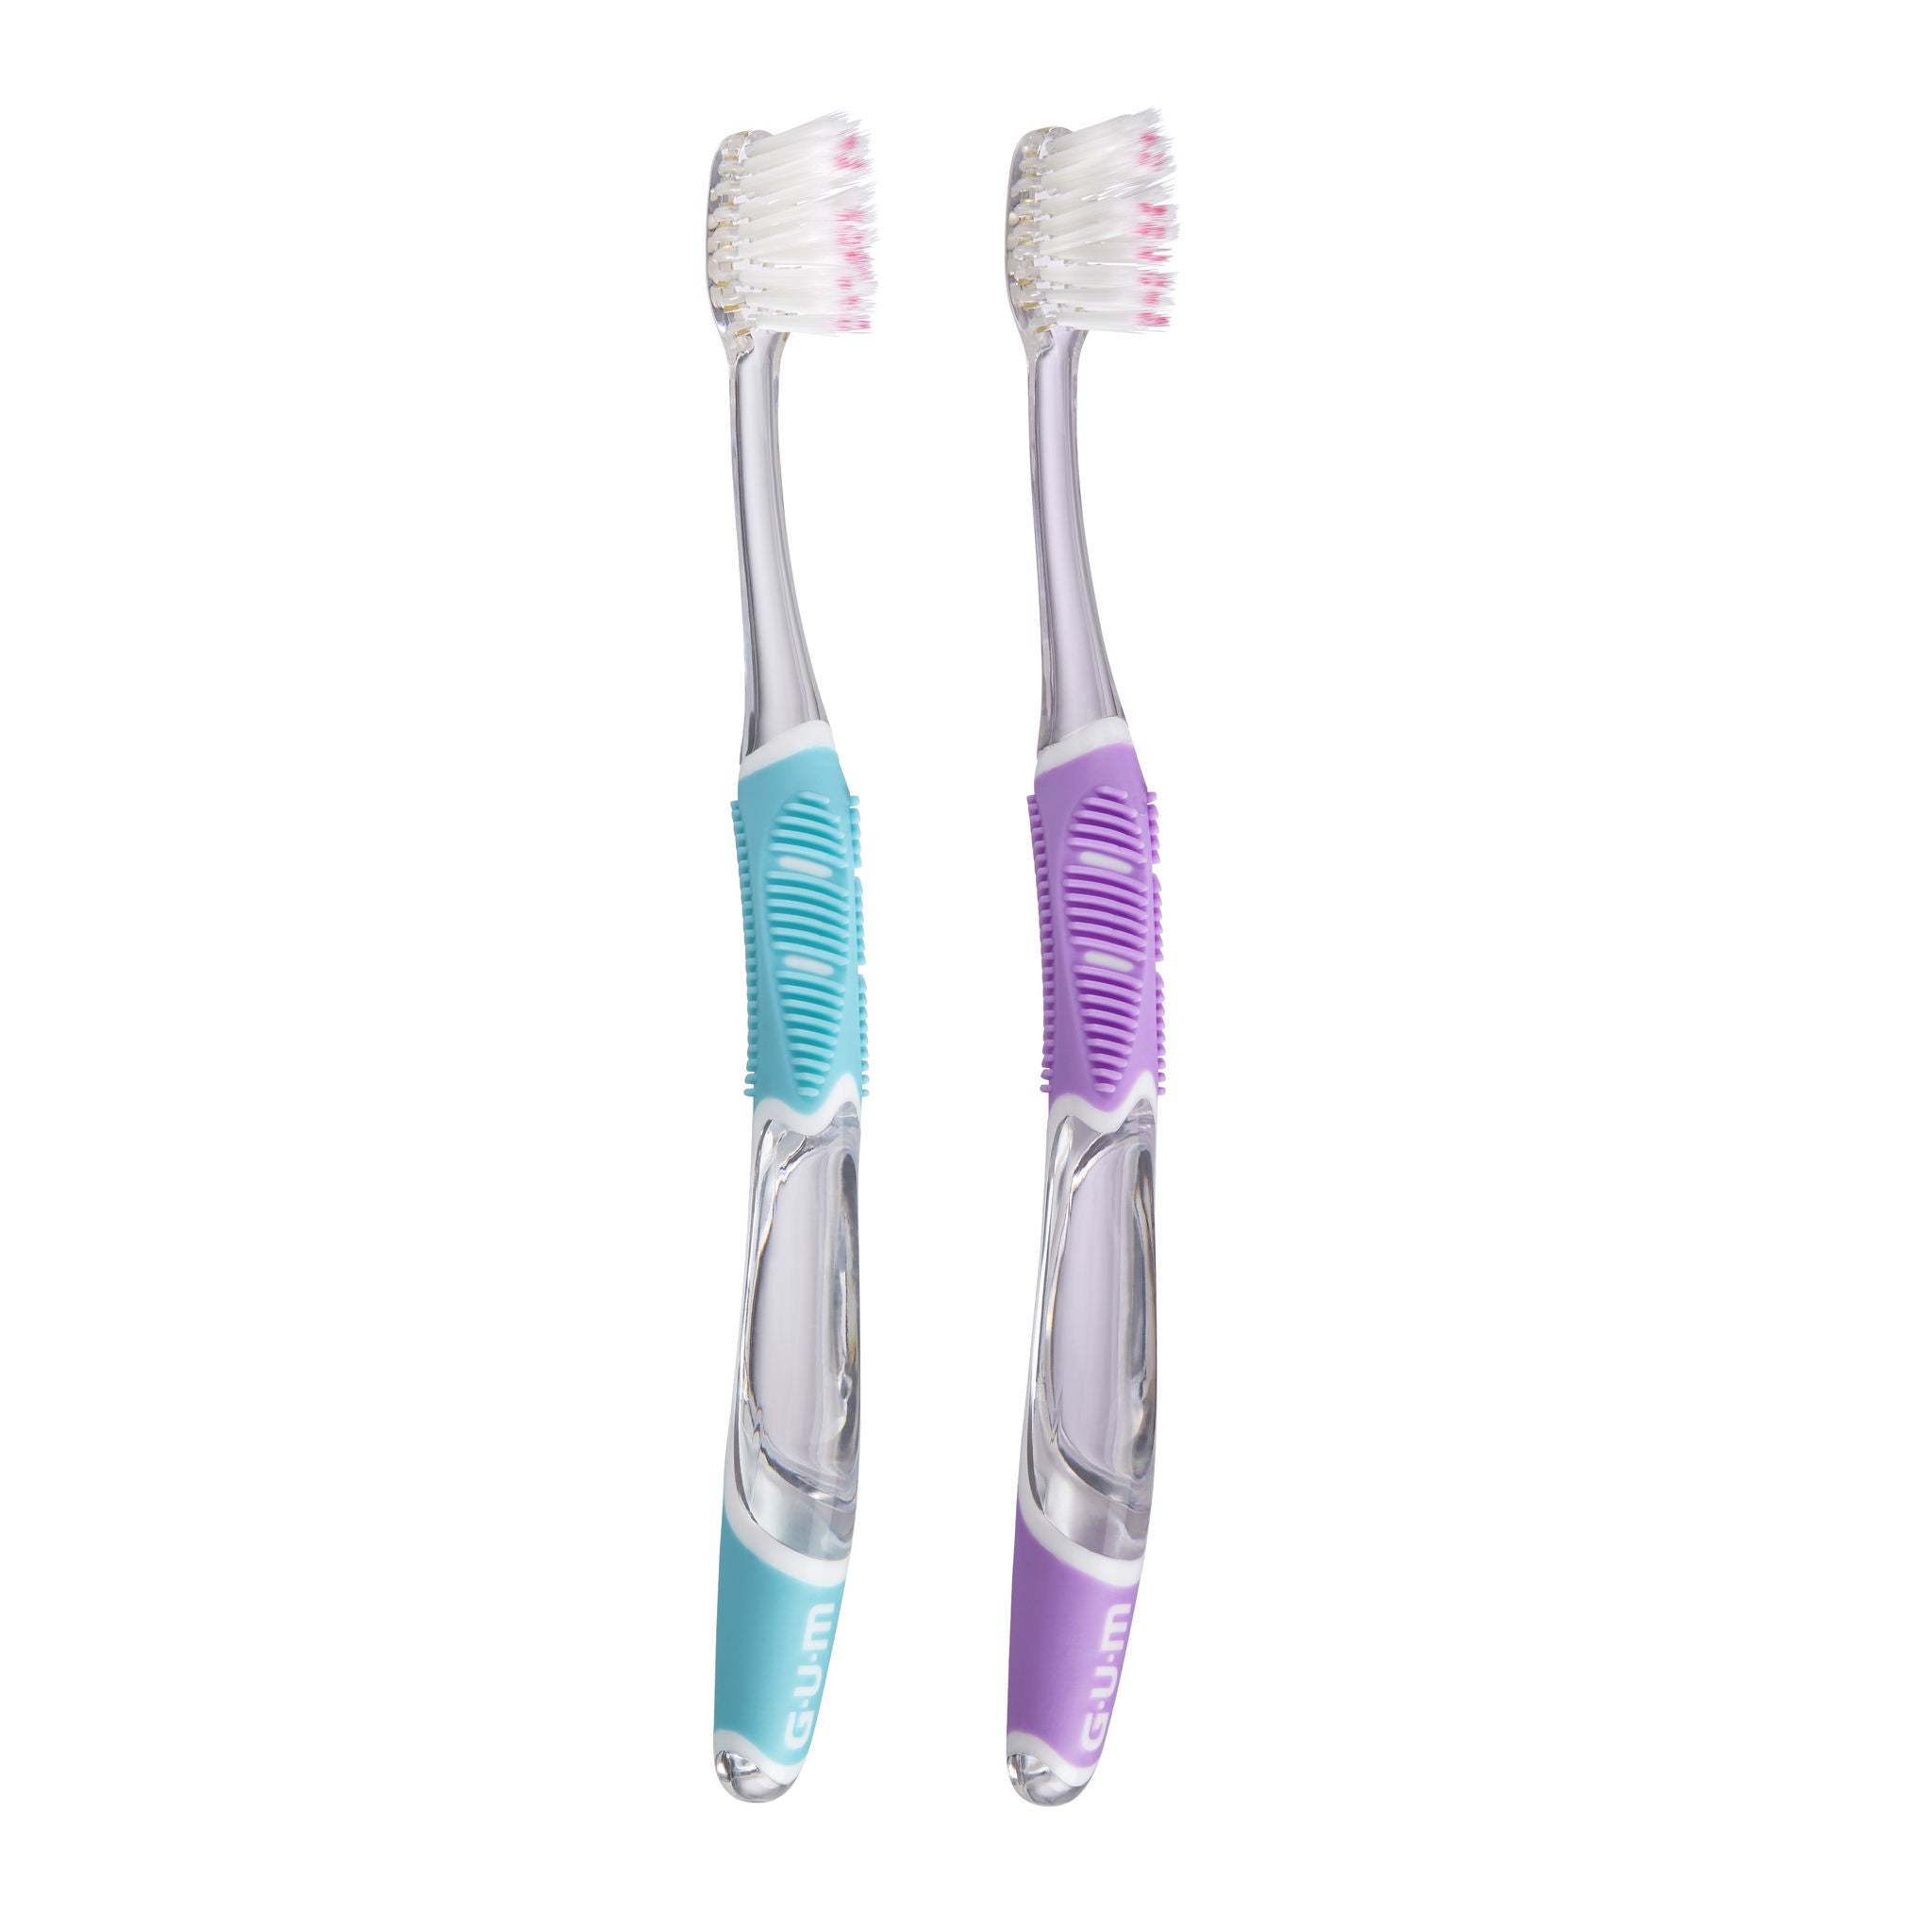 527-528-Product-Toothbrush-Technique-Manual-SensitiveClean-naked-2colors.jpg